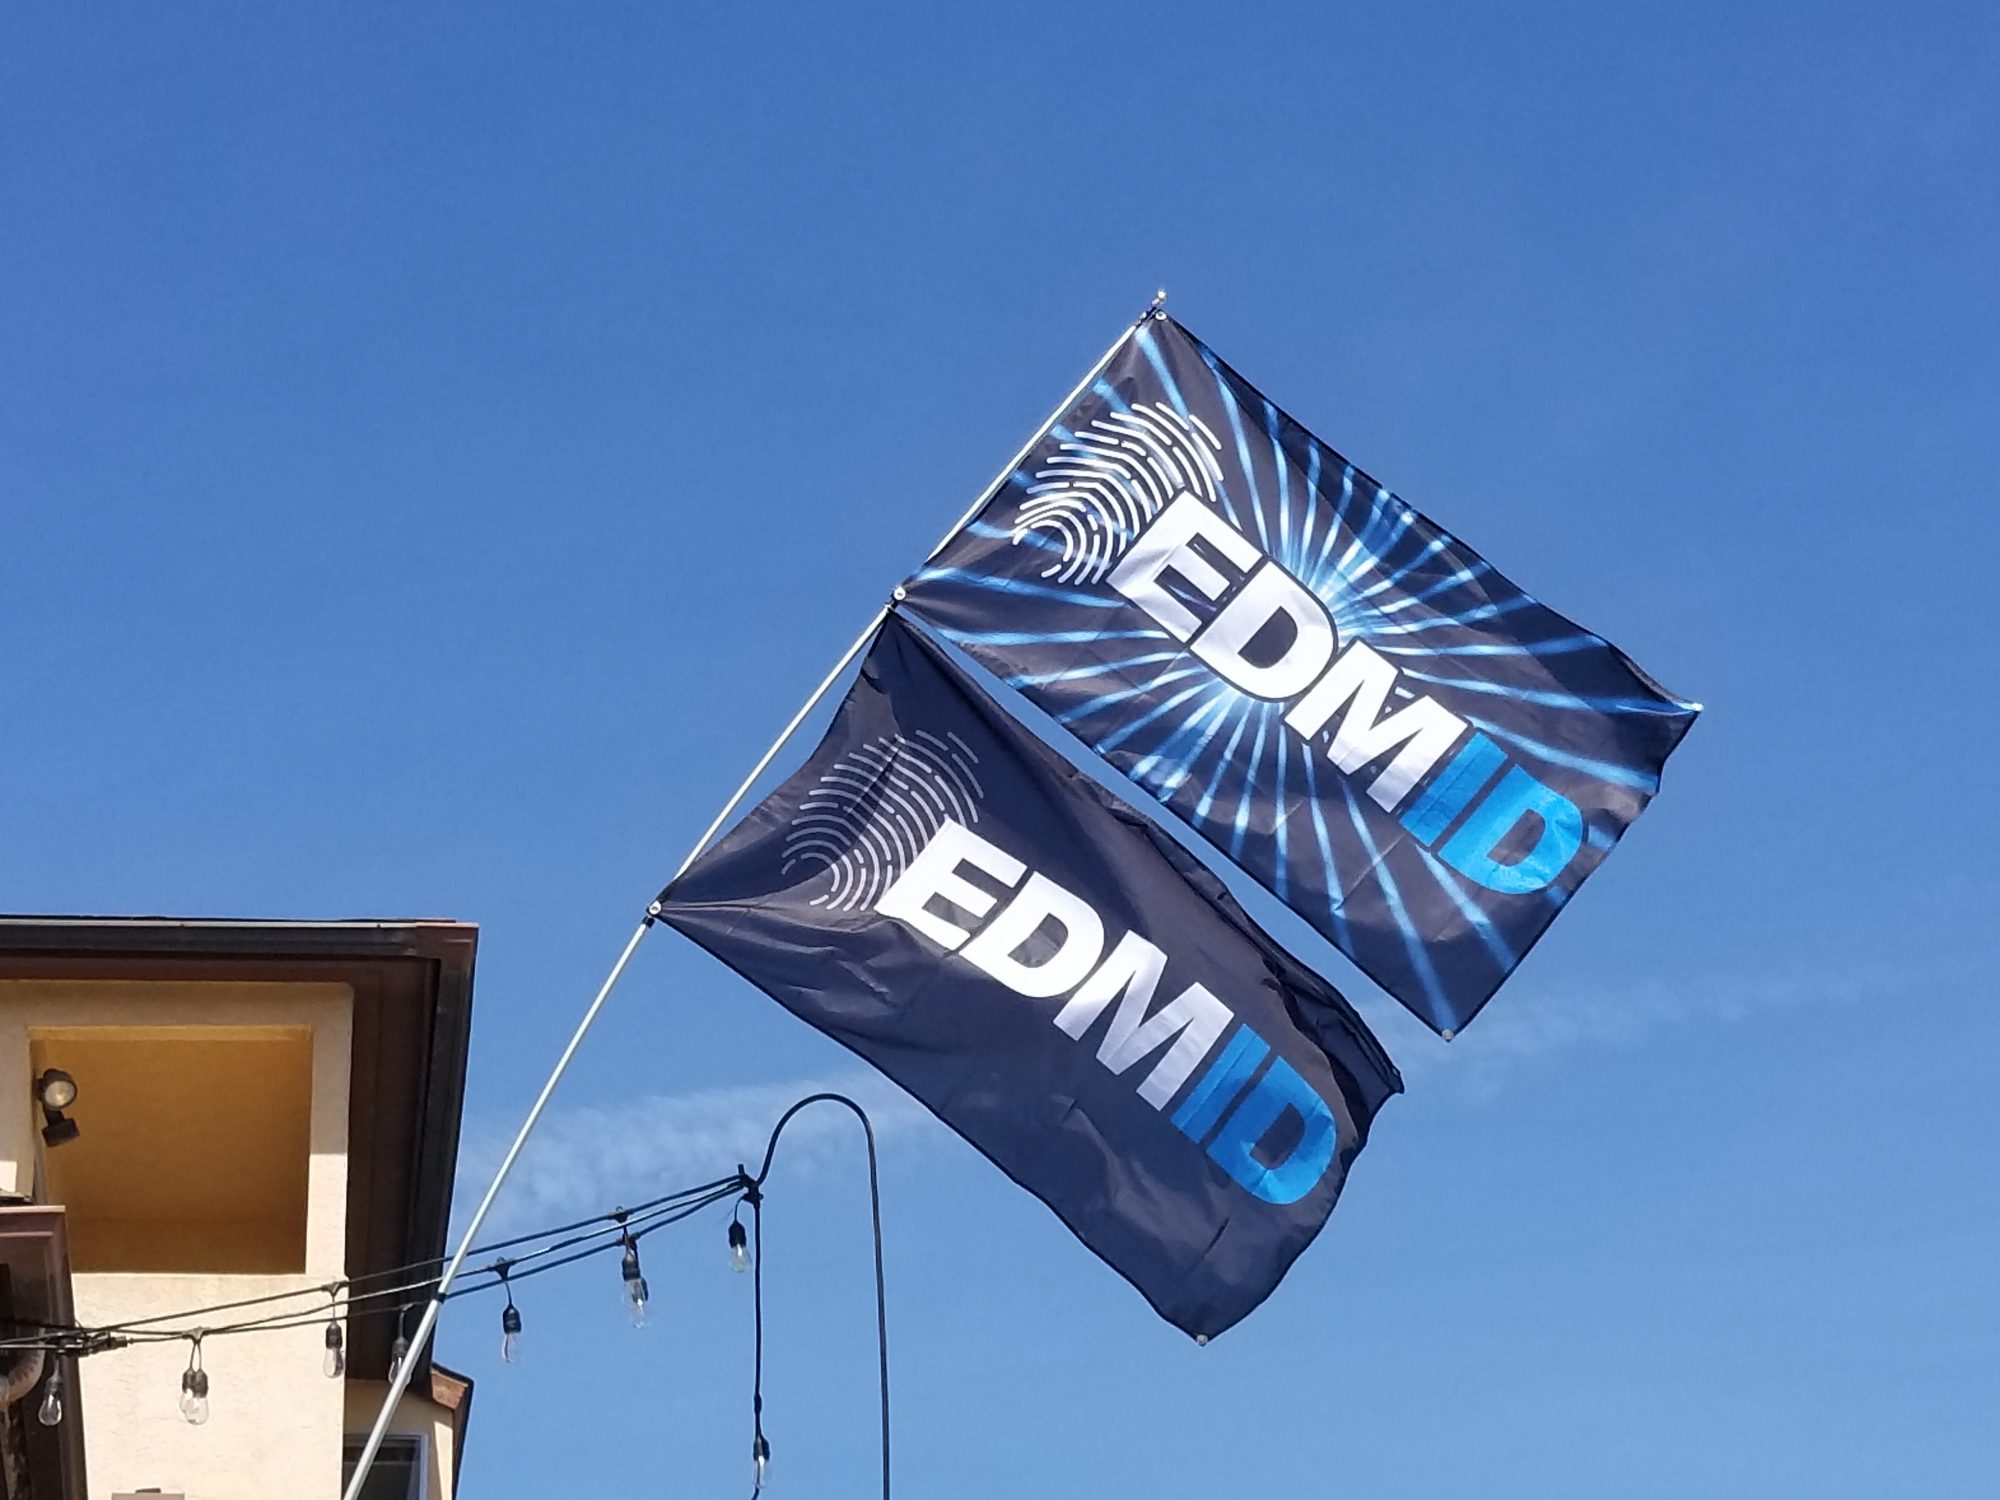 EDMID Flags From Fest Flags